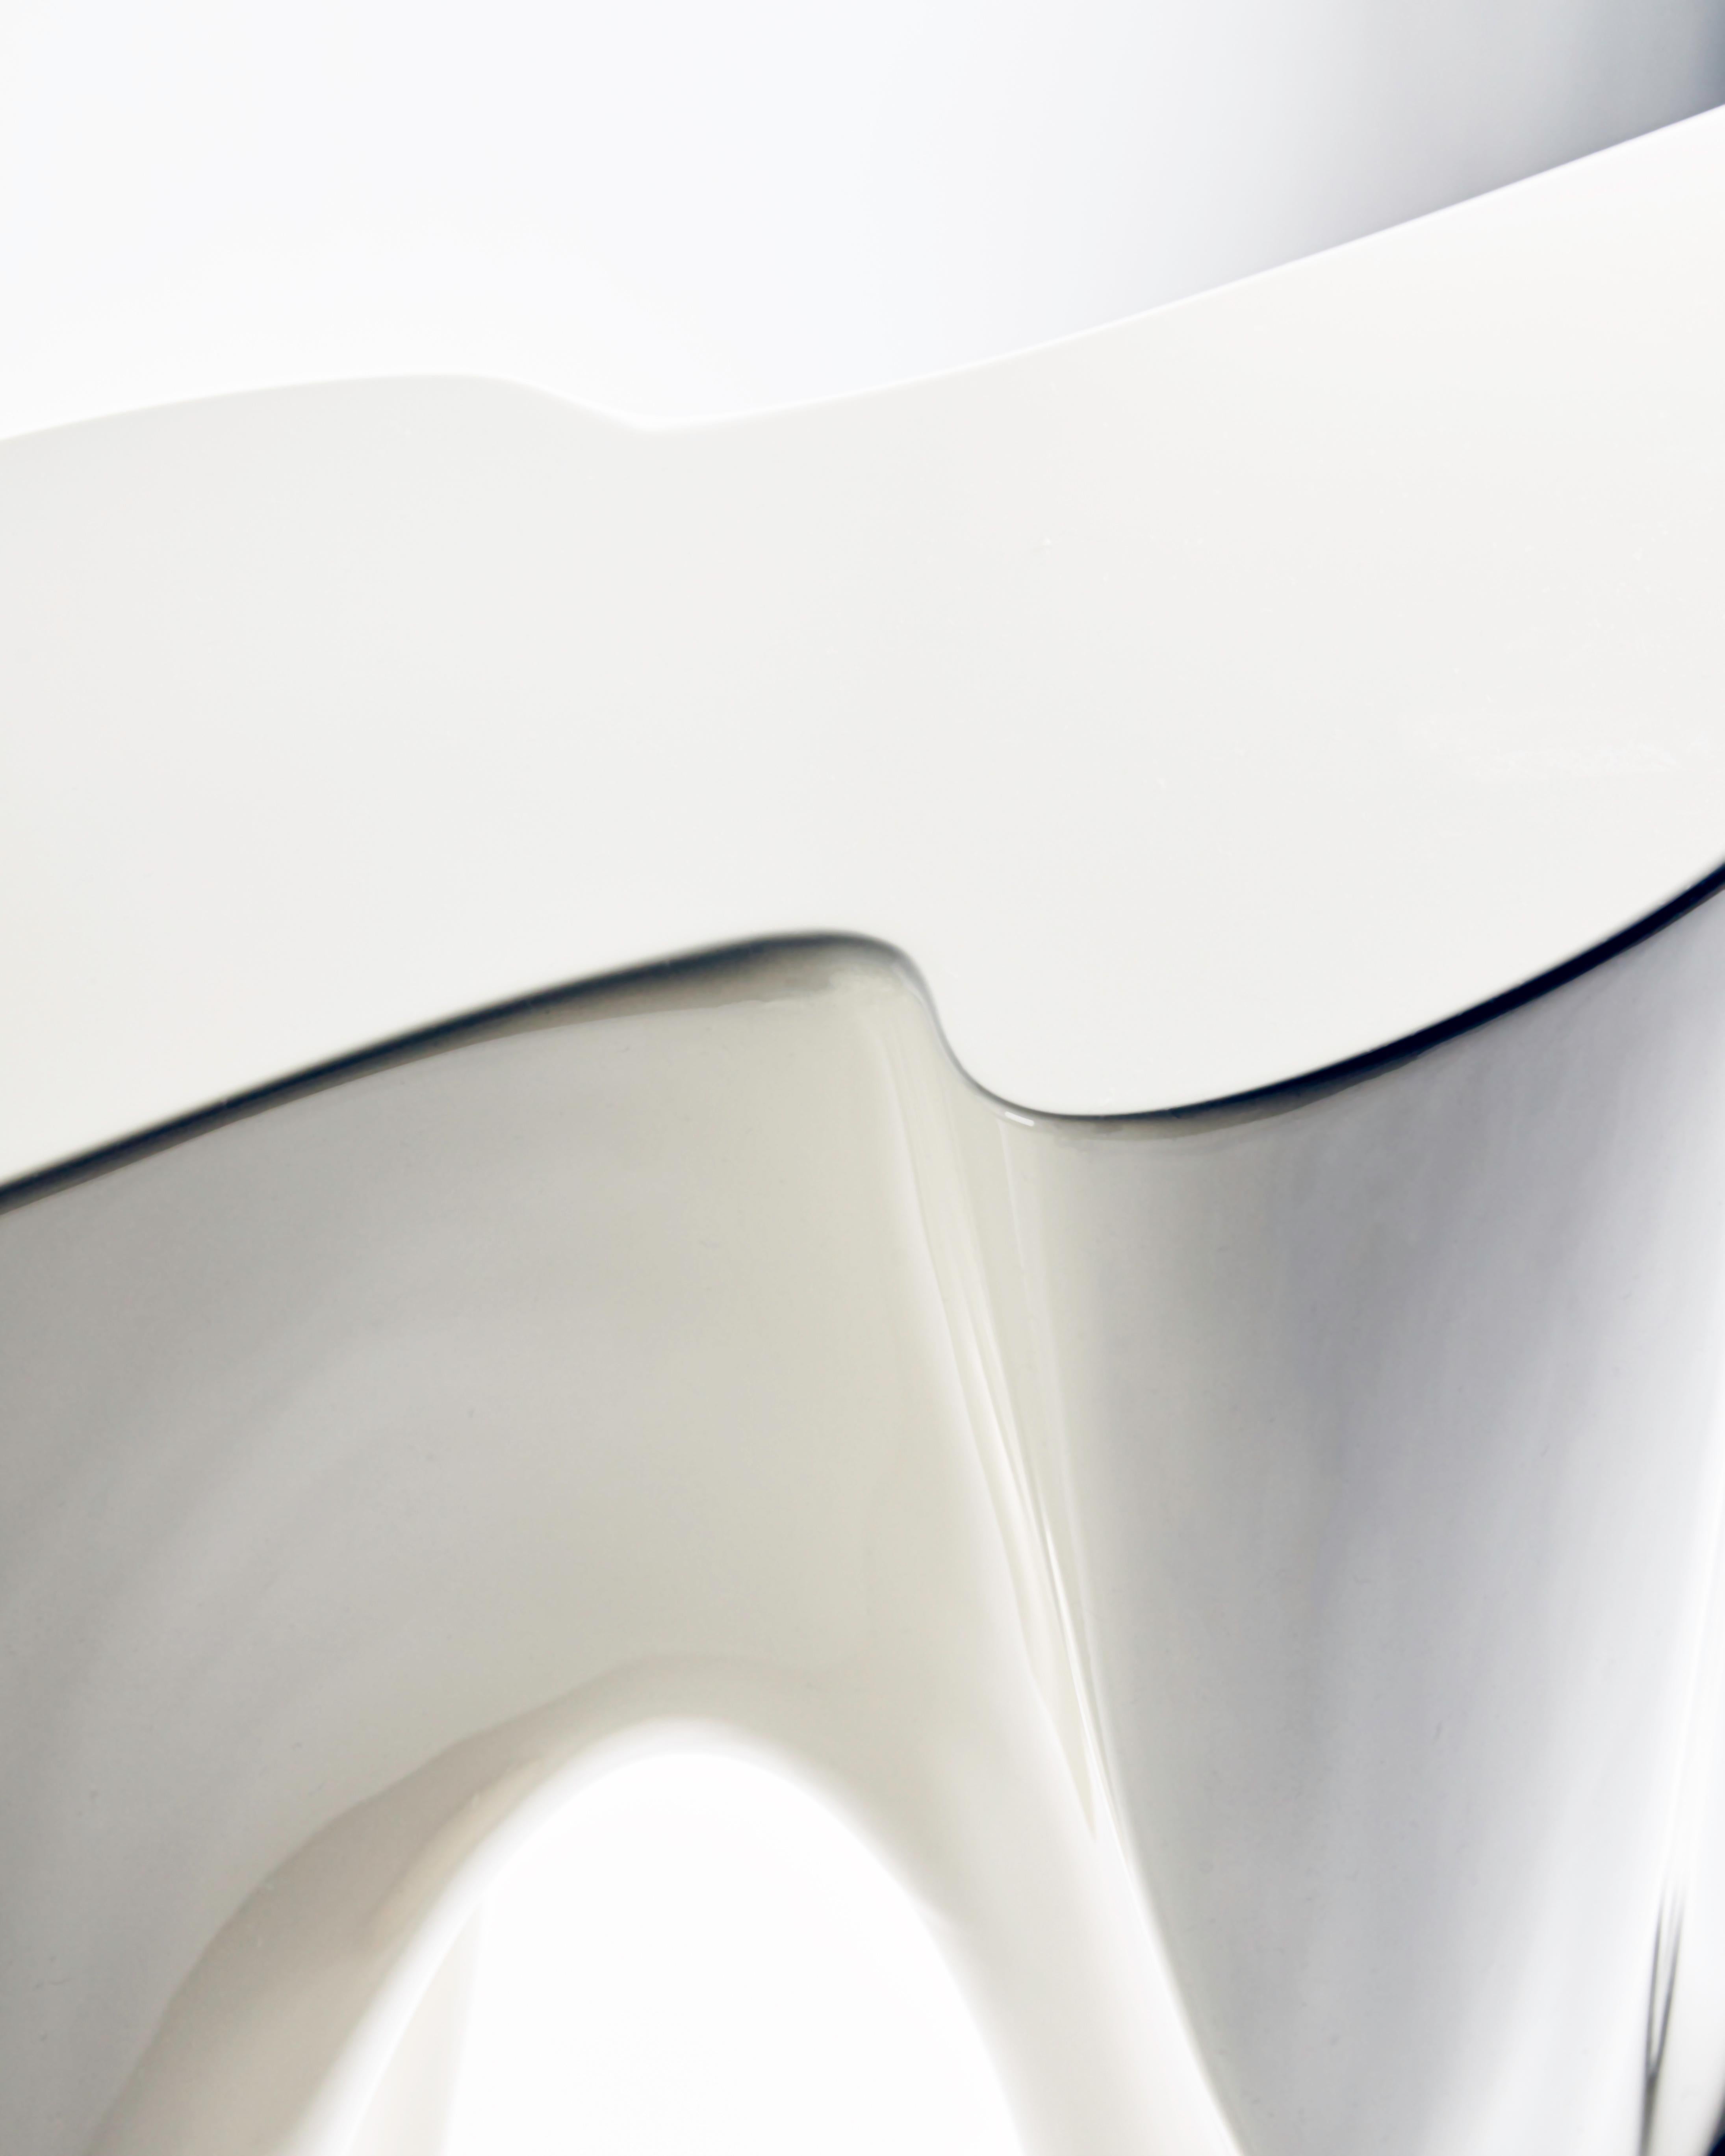 The Neolithic console table stands confidently in high gloss cream lacquer. 
Taken from the Holocene master but pulled, manipulated and sliced across parallel planes in CAD after being 3D scanned to give function to this bold sculptural statement